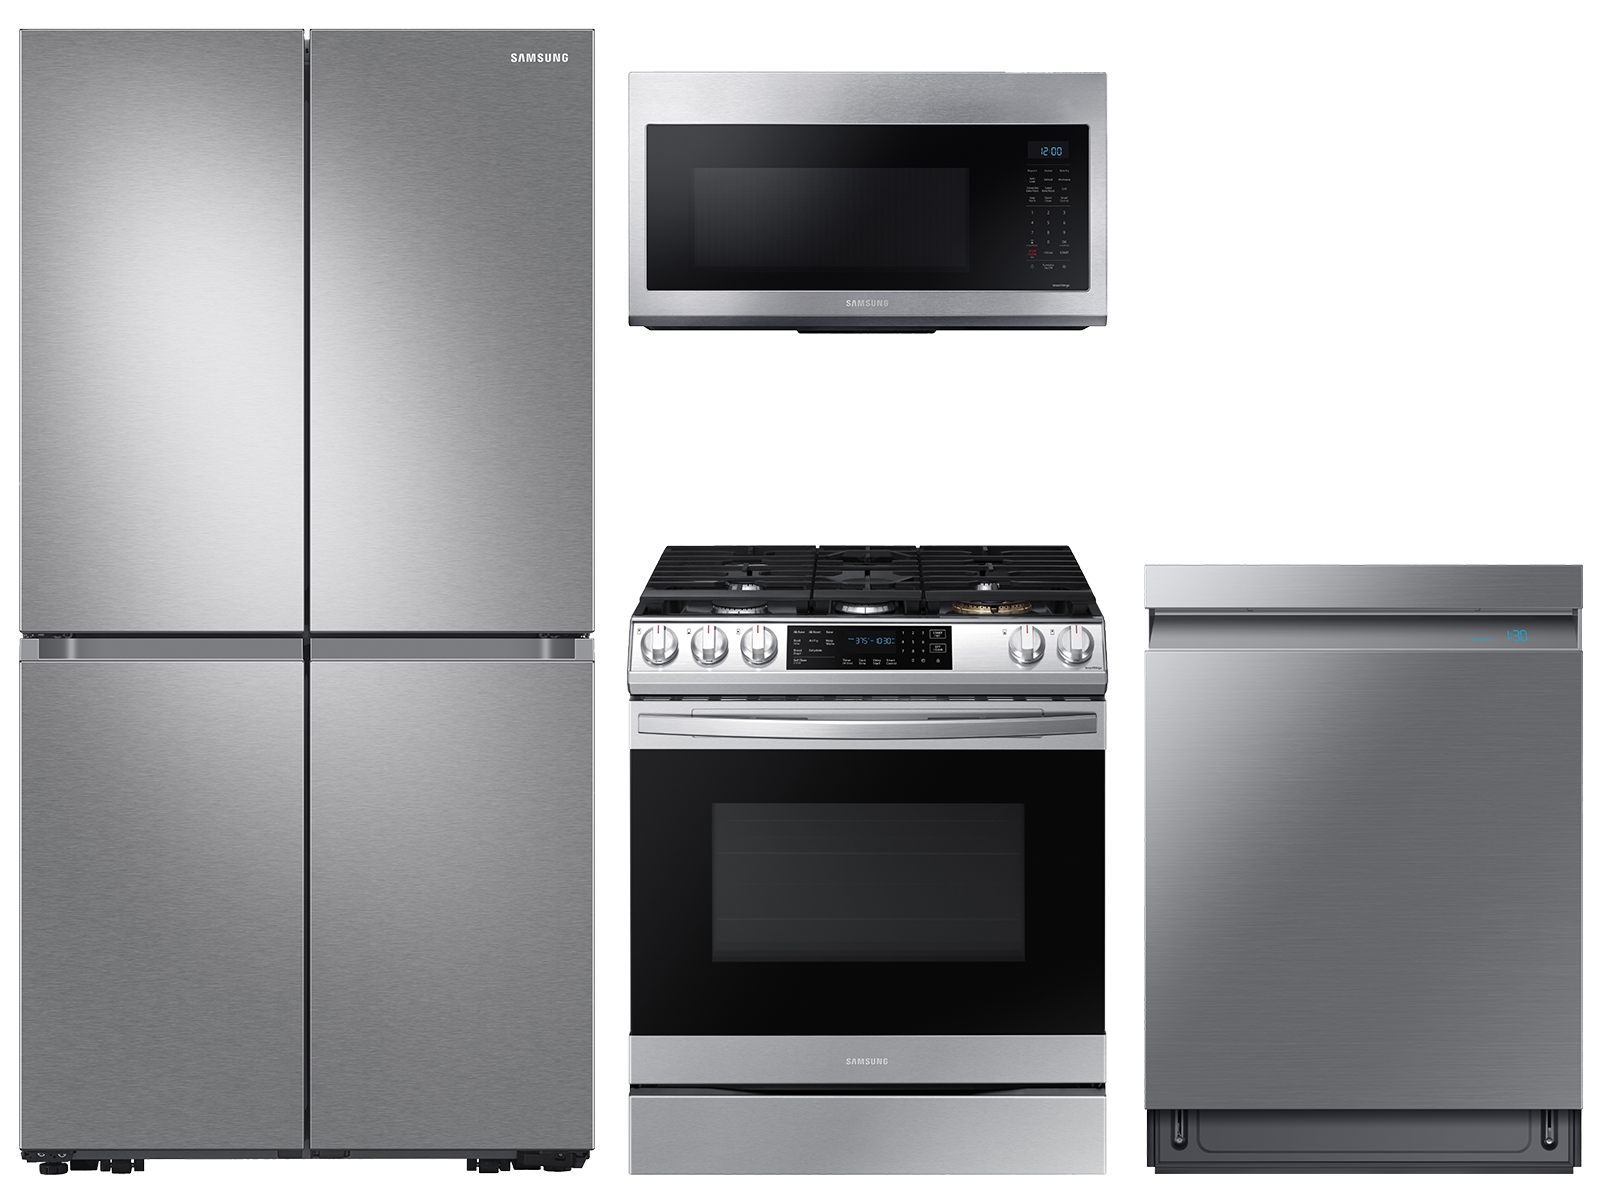 29 cu. ft. Family Hub™ 4-Door refrigerator, gas range, convection microwave and Smart Linear dishwasher package